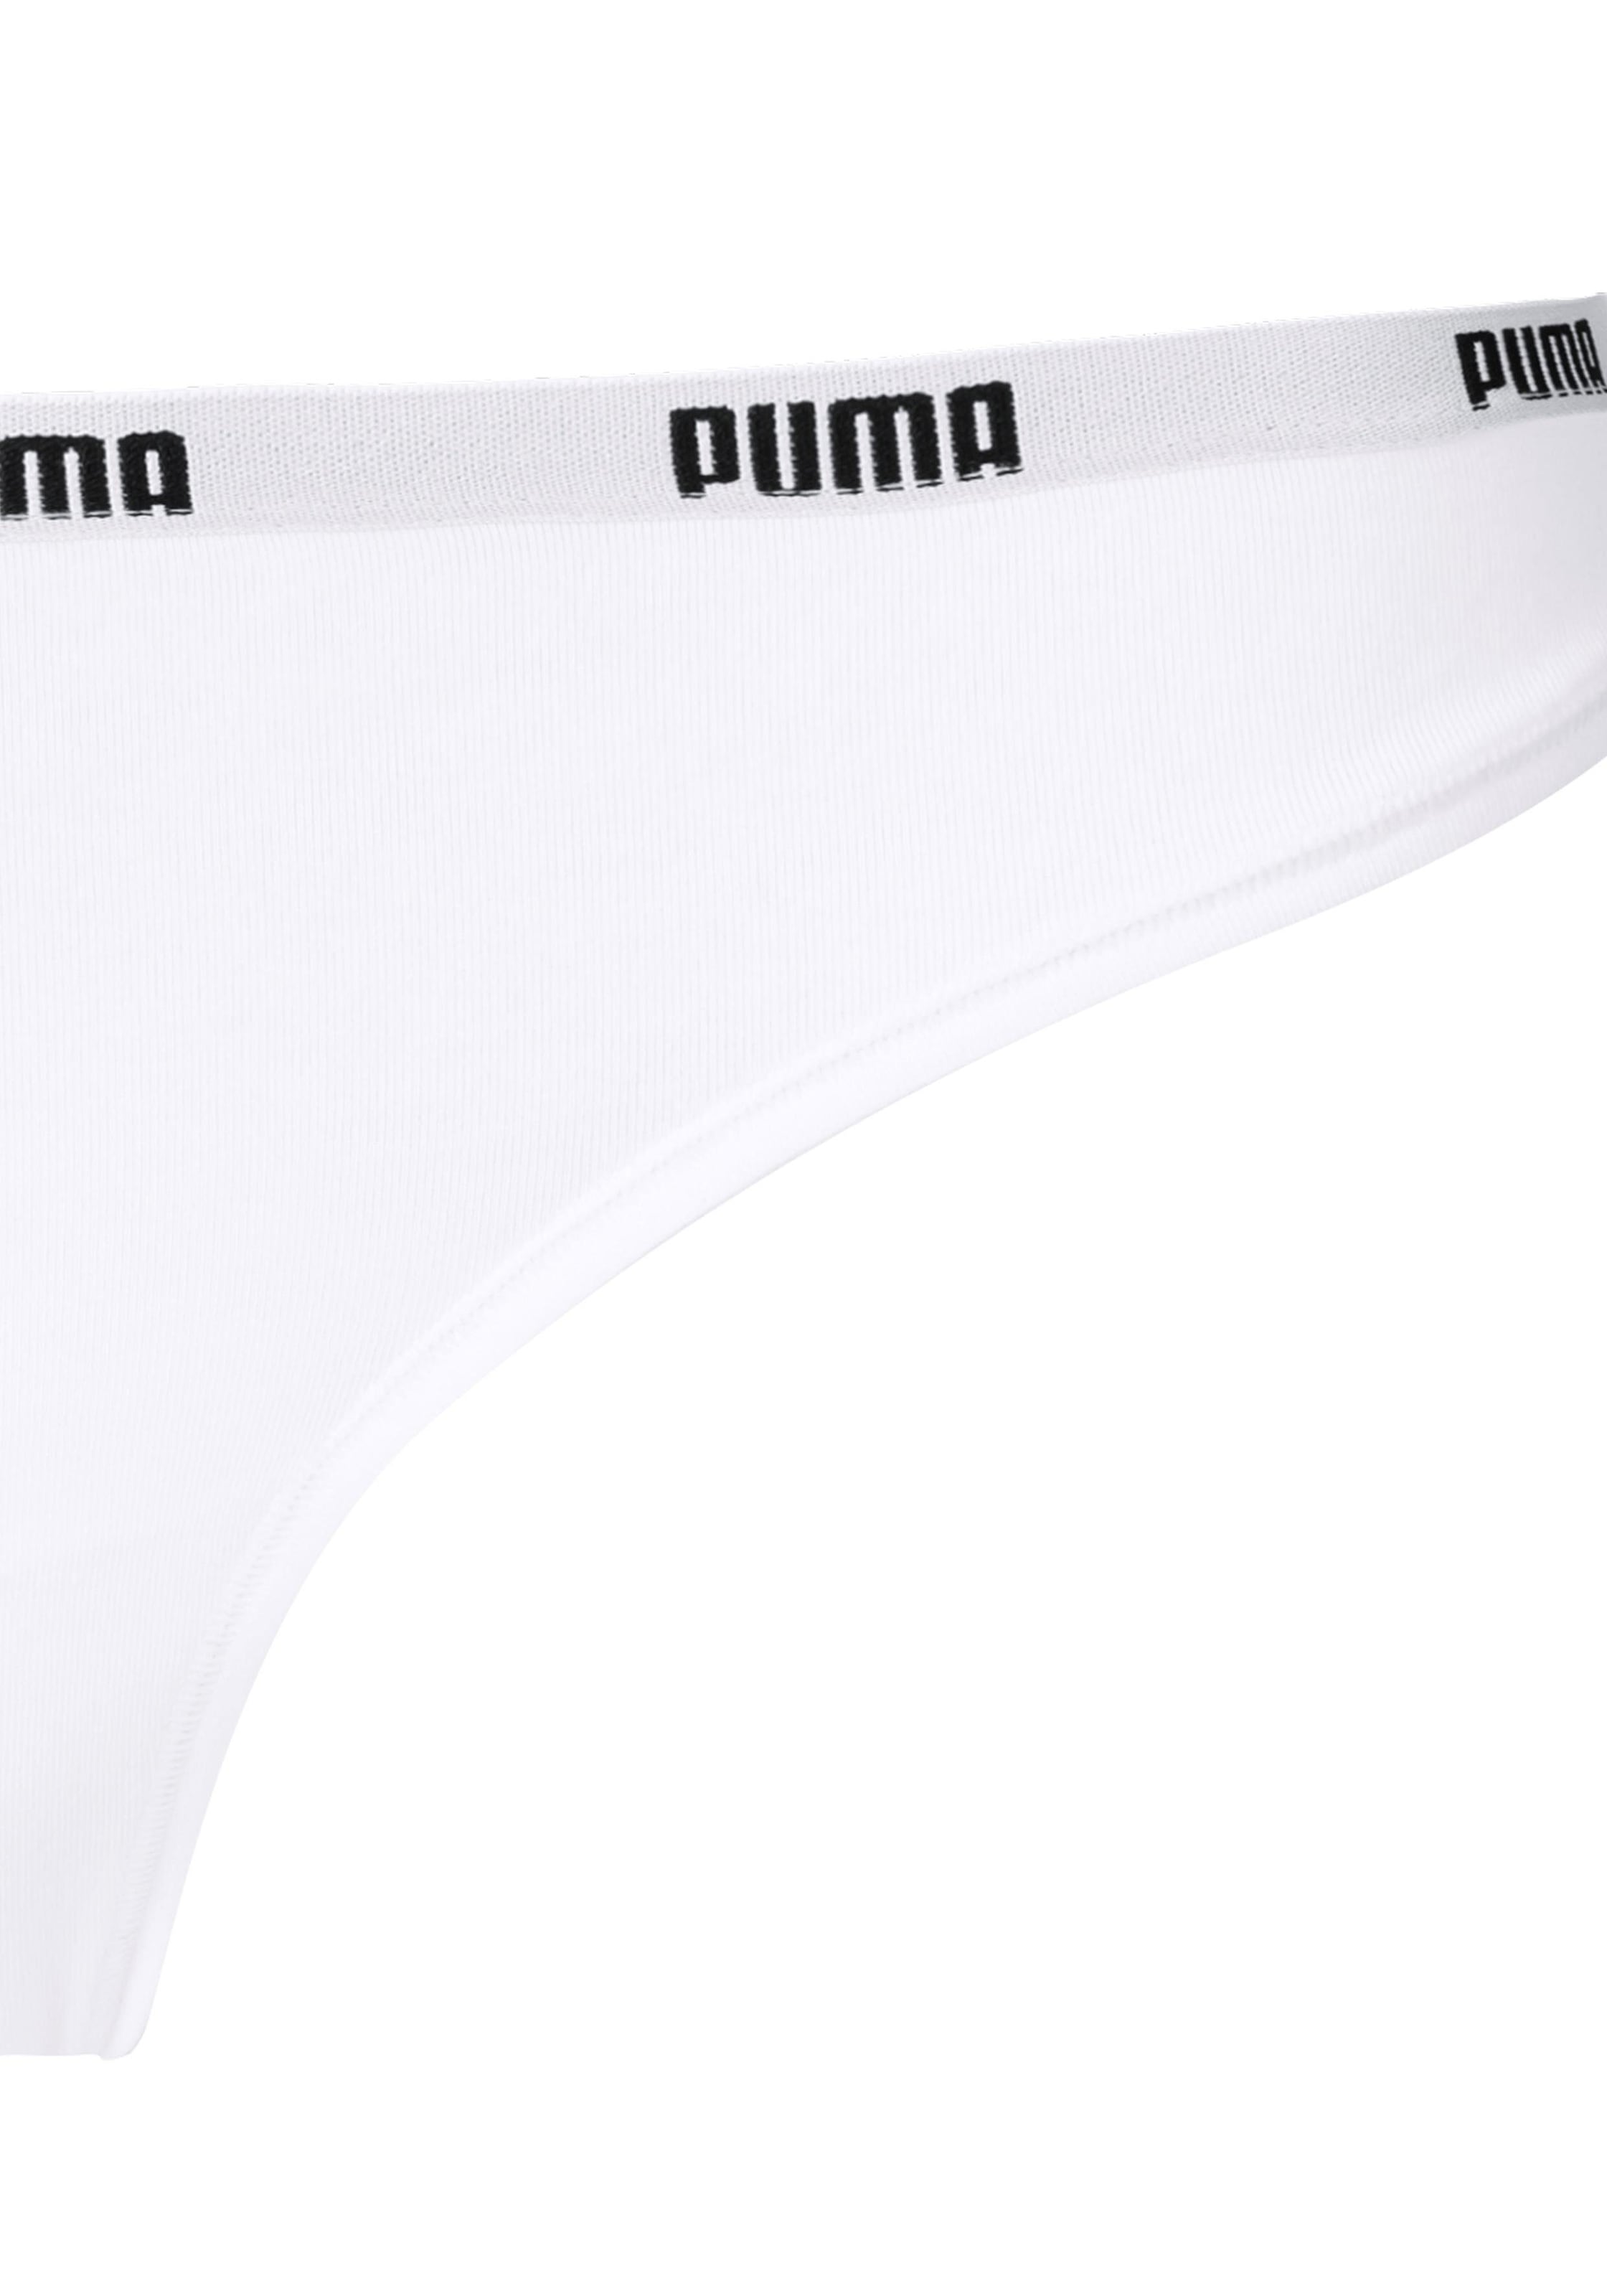 PUMA String, (Packung, 3 St.)